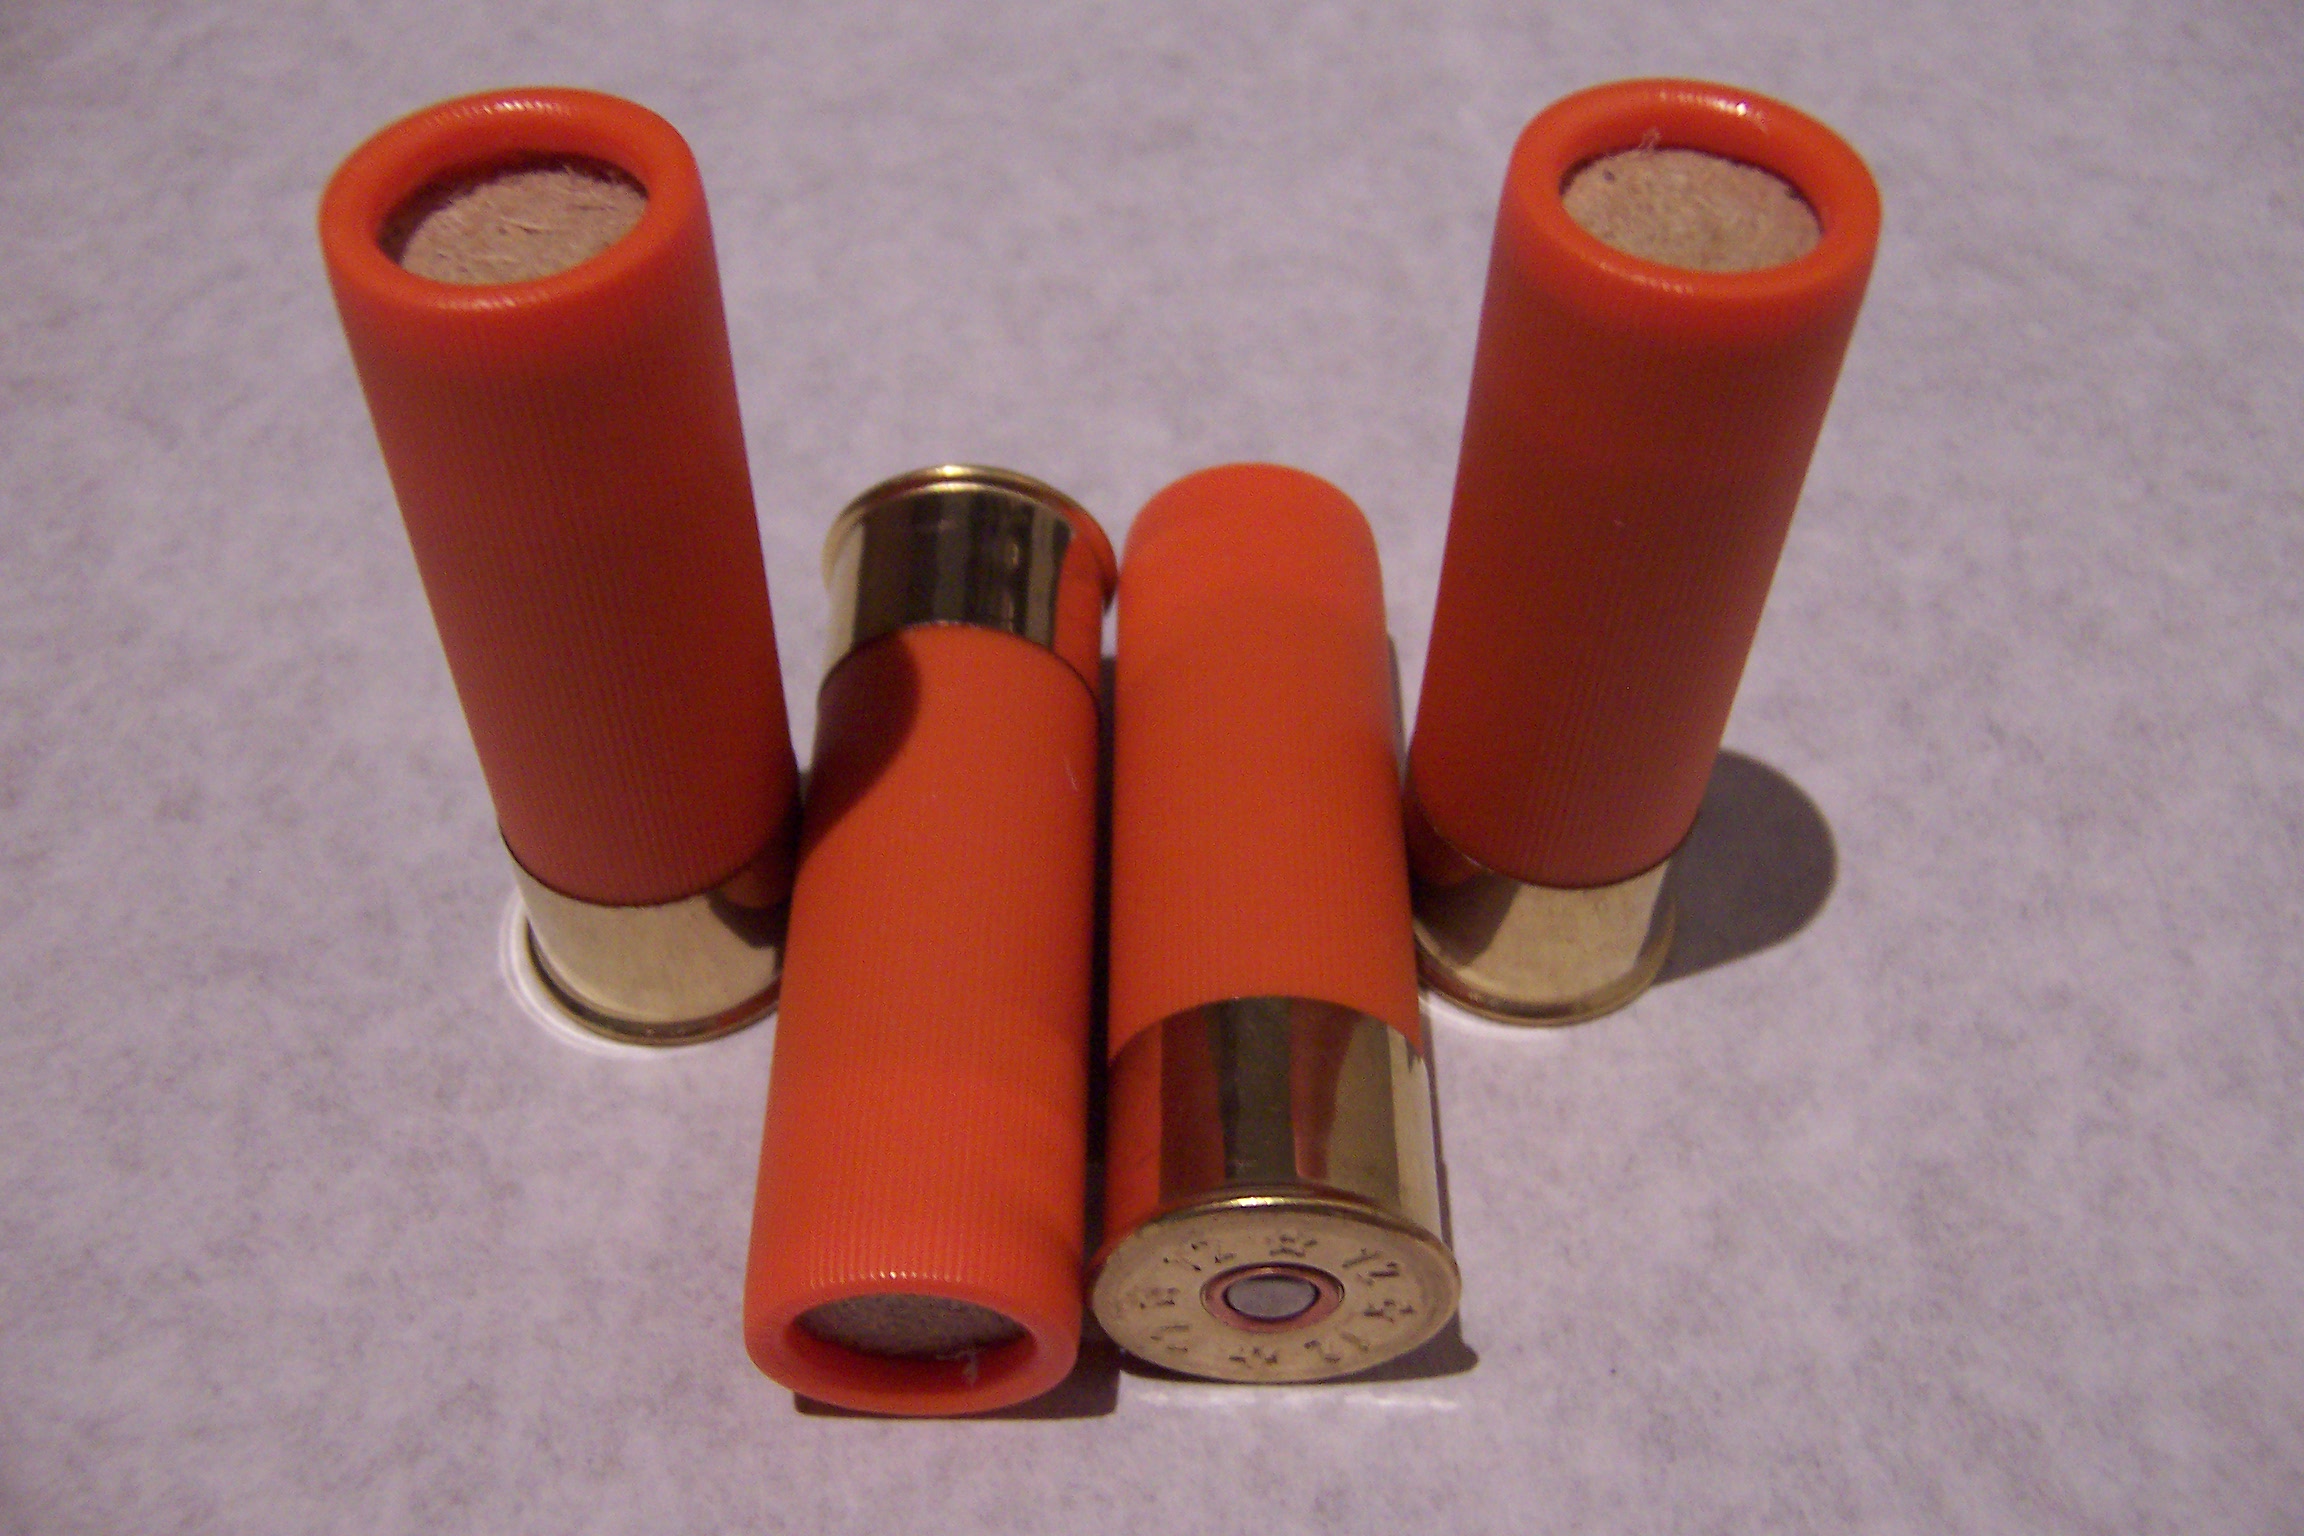 12 gauge Dummy rounds.10 rounds - The Perfect Shot